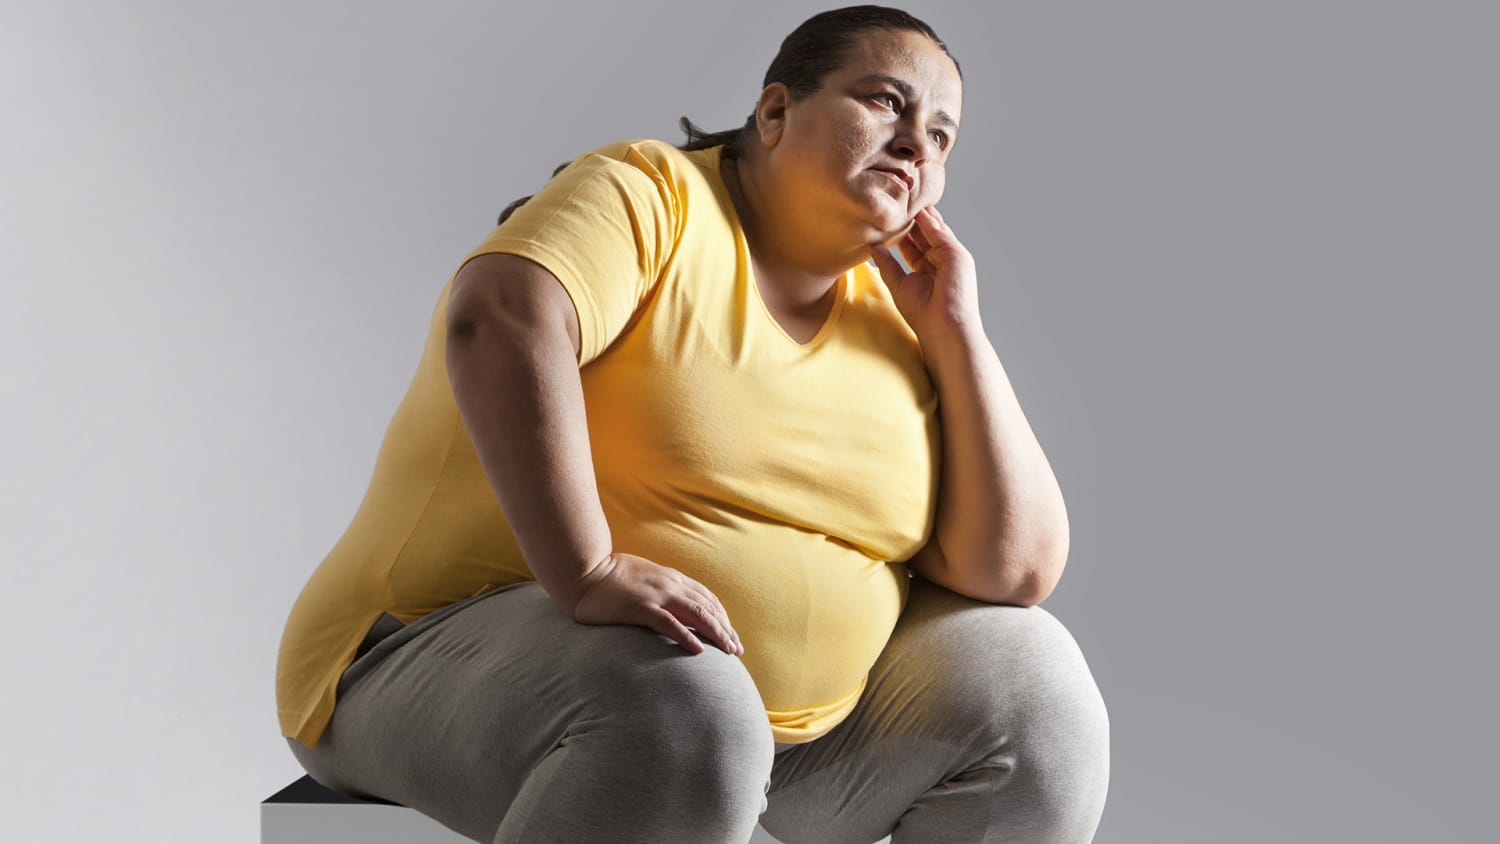 Healthy obesity challenged by studies that find health risks